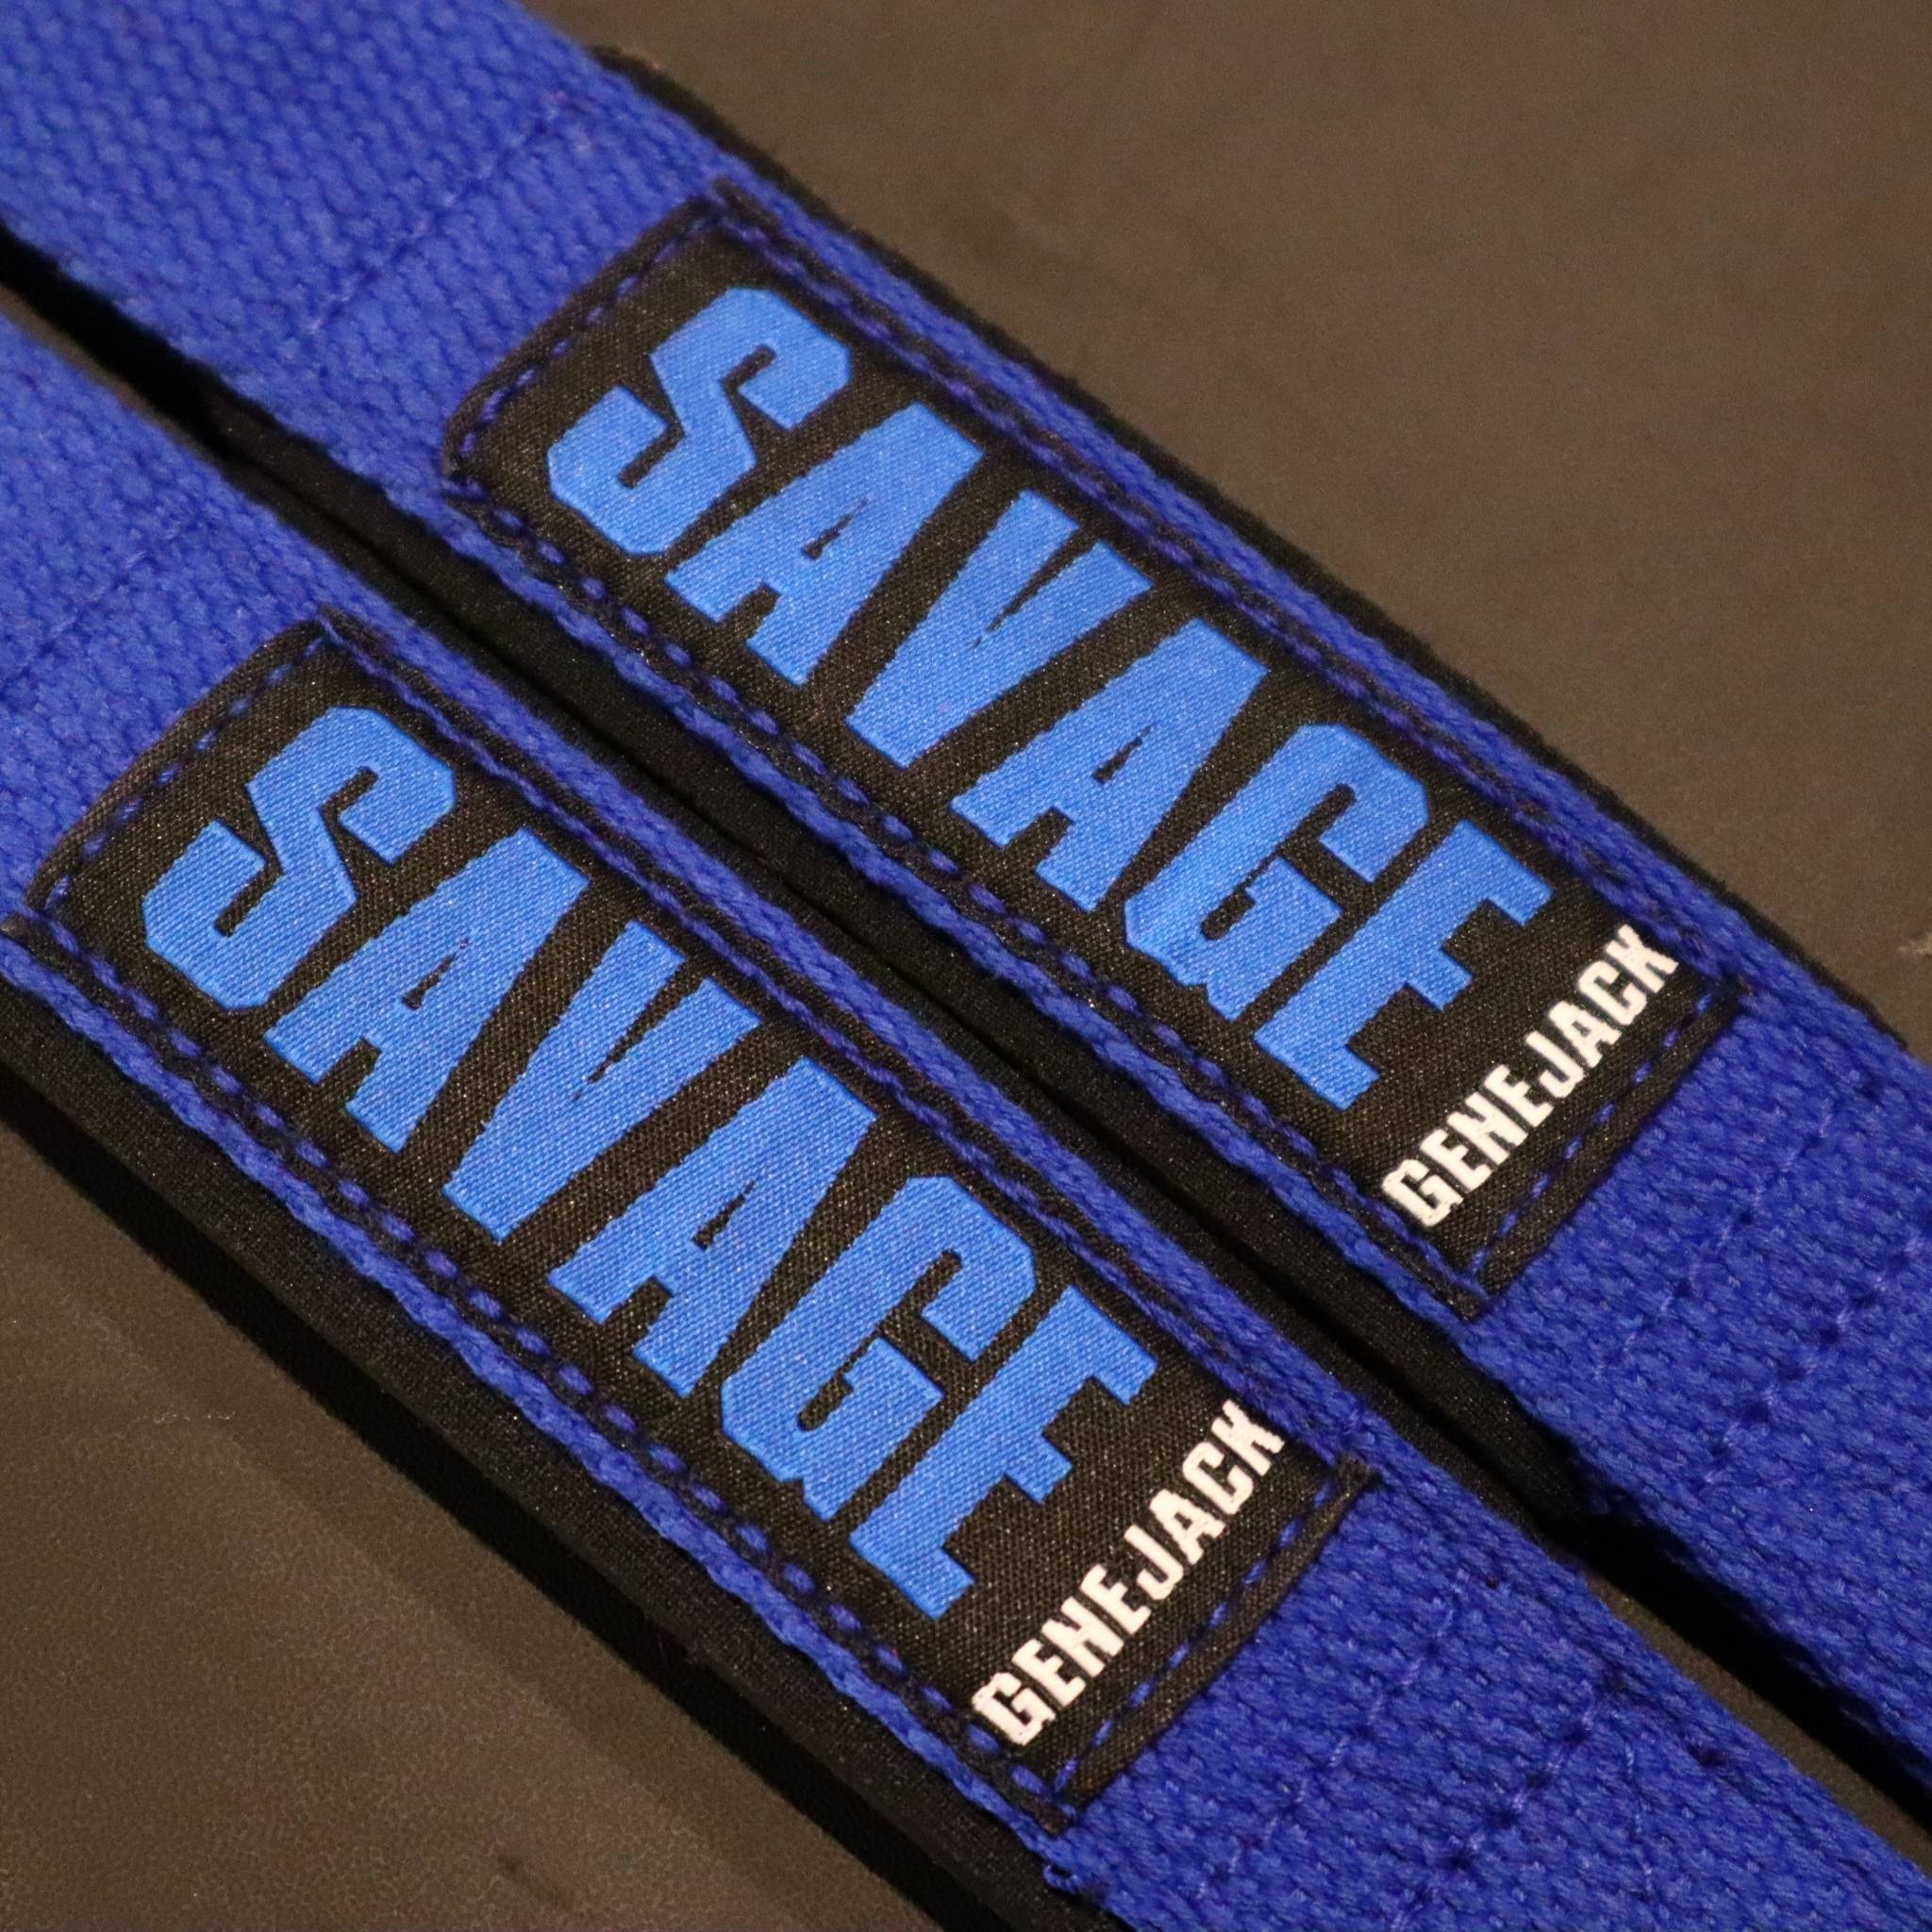 Savage Padded Lifting Straps from Genejack for Genejack WOD